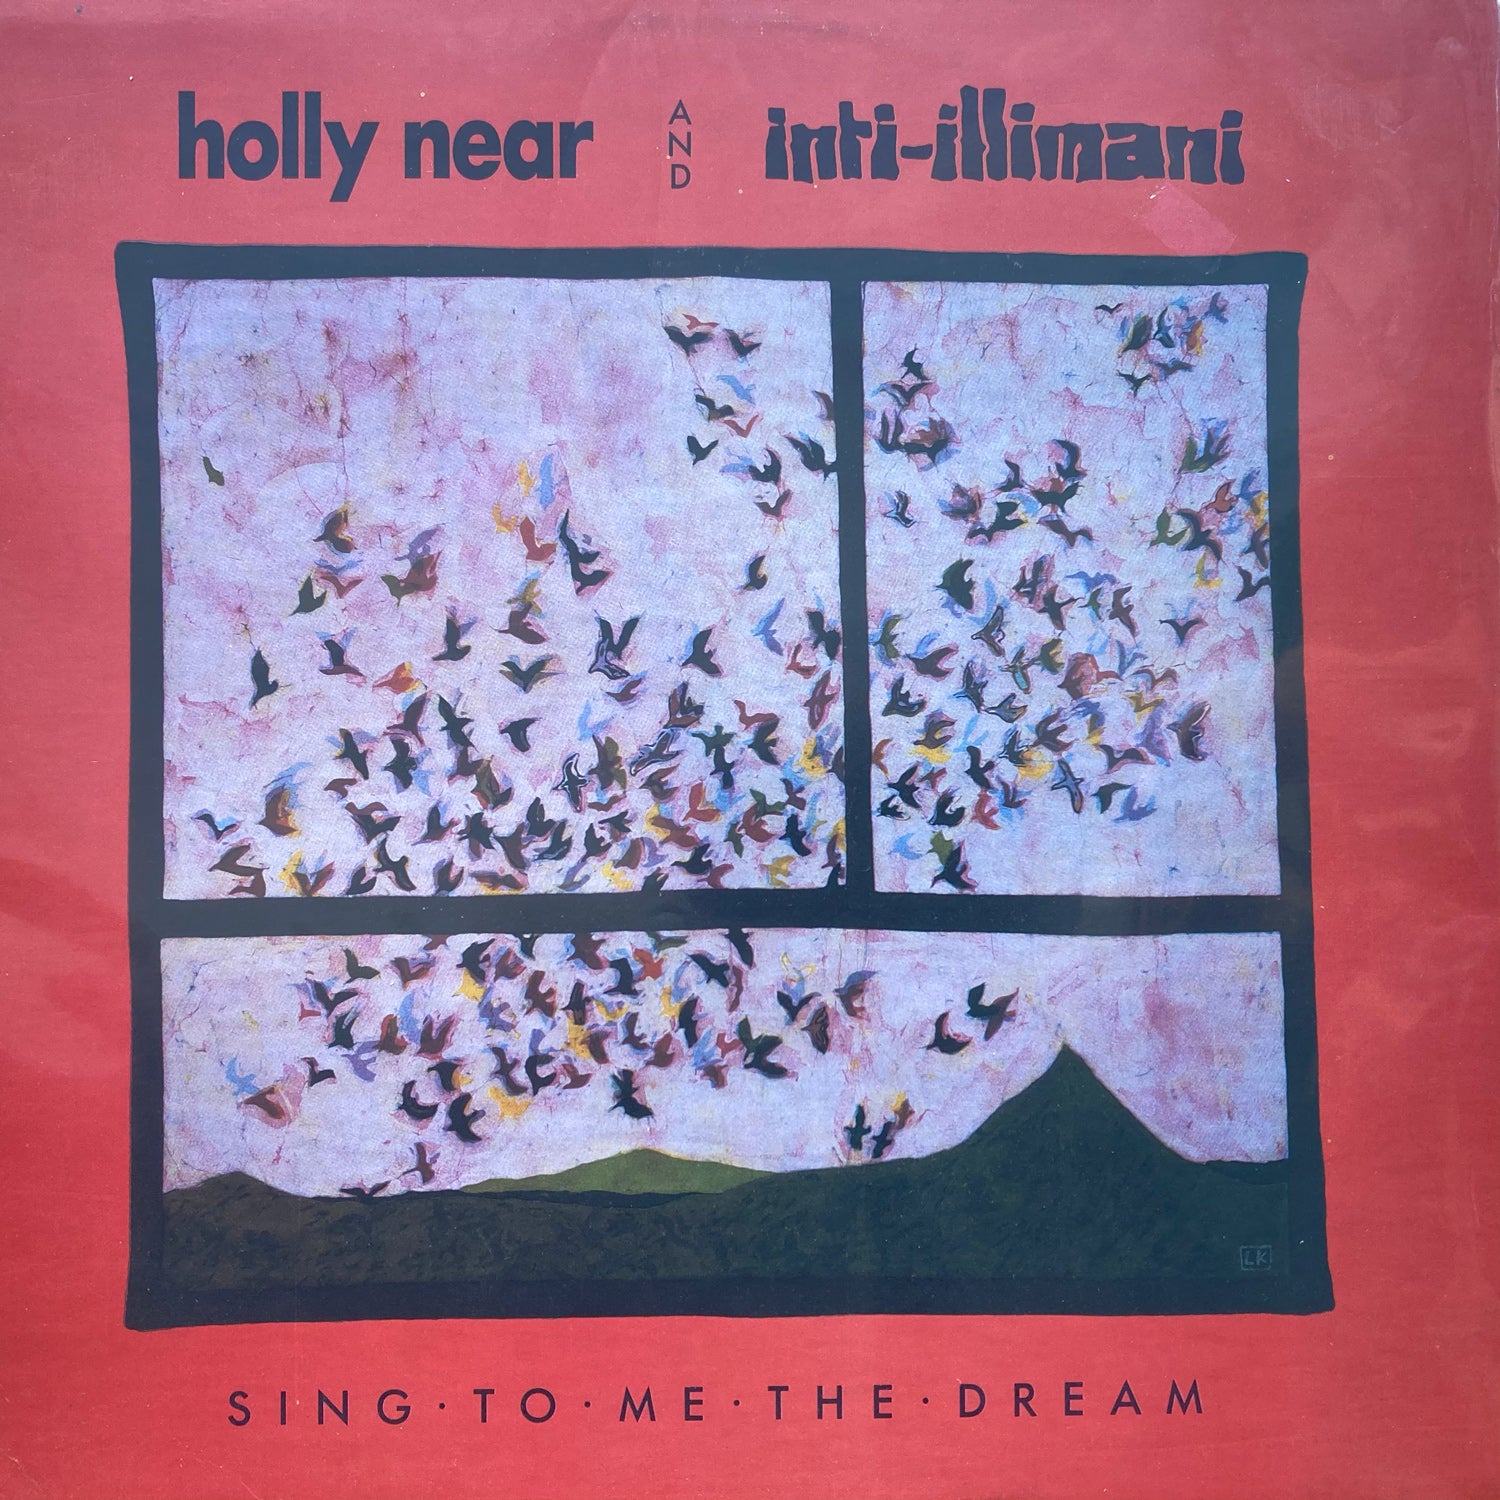 Holly Near and Inti-illimani - Sing To Me The Dream